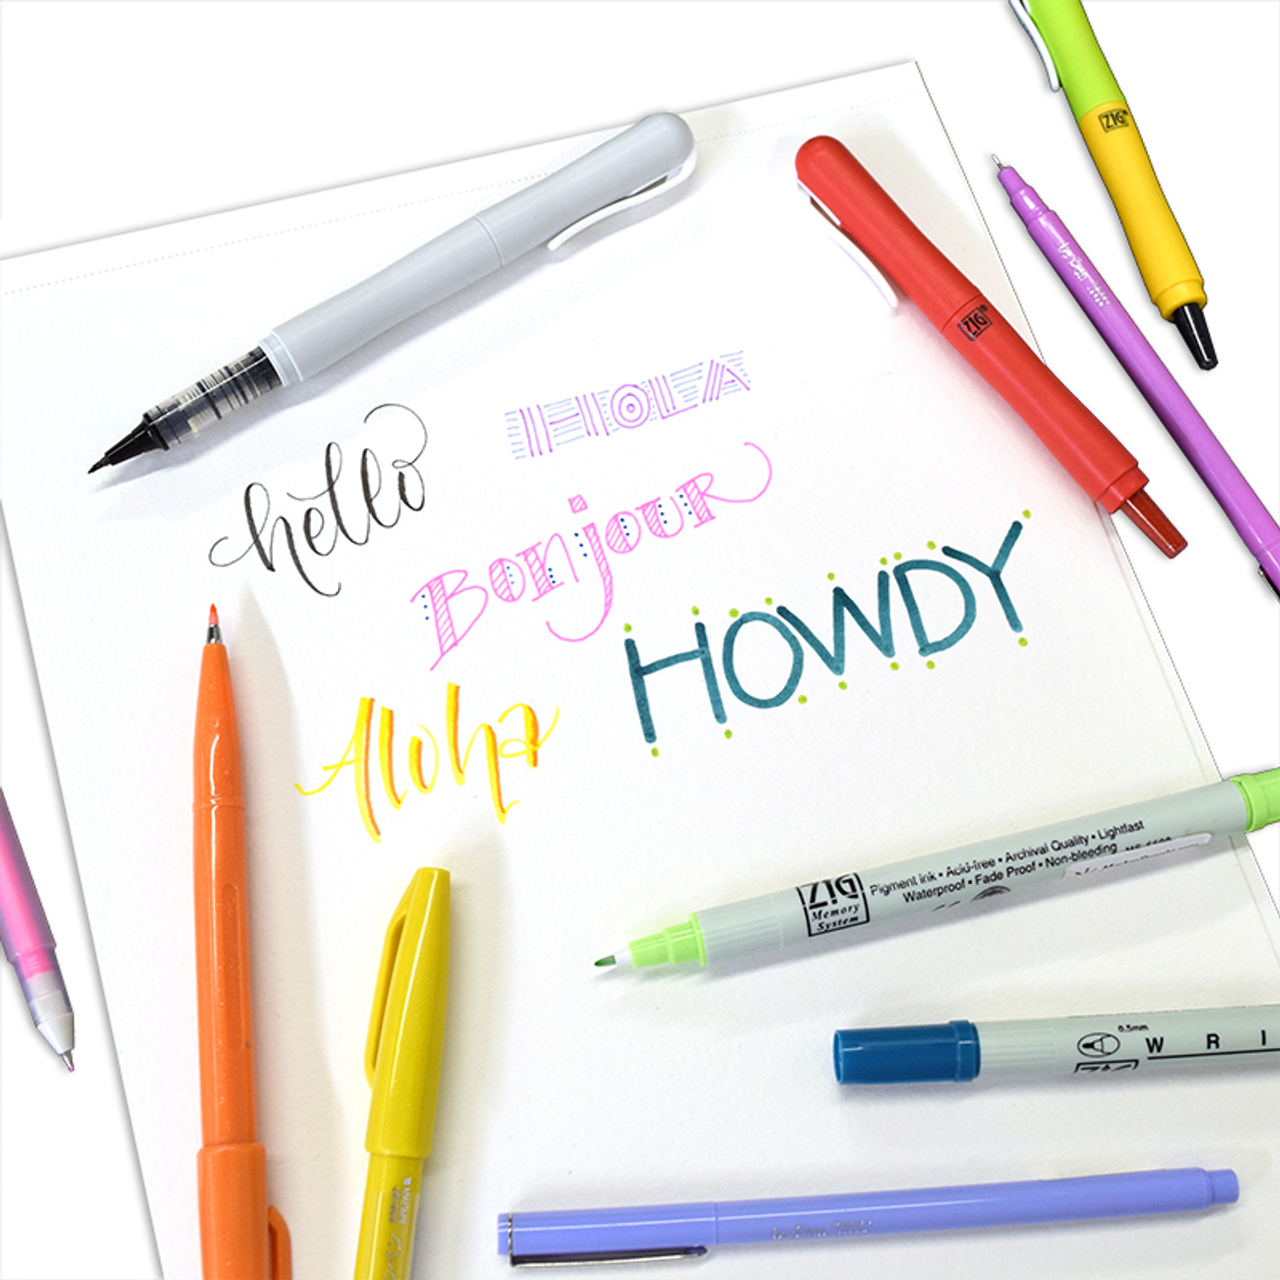 Best White Markers for Hand Lettering 